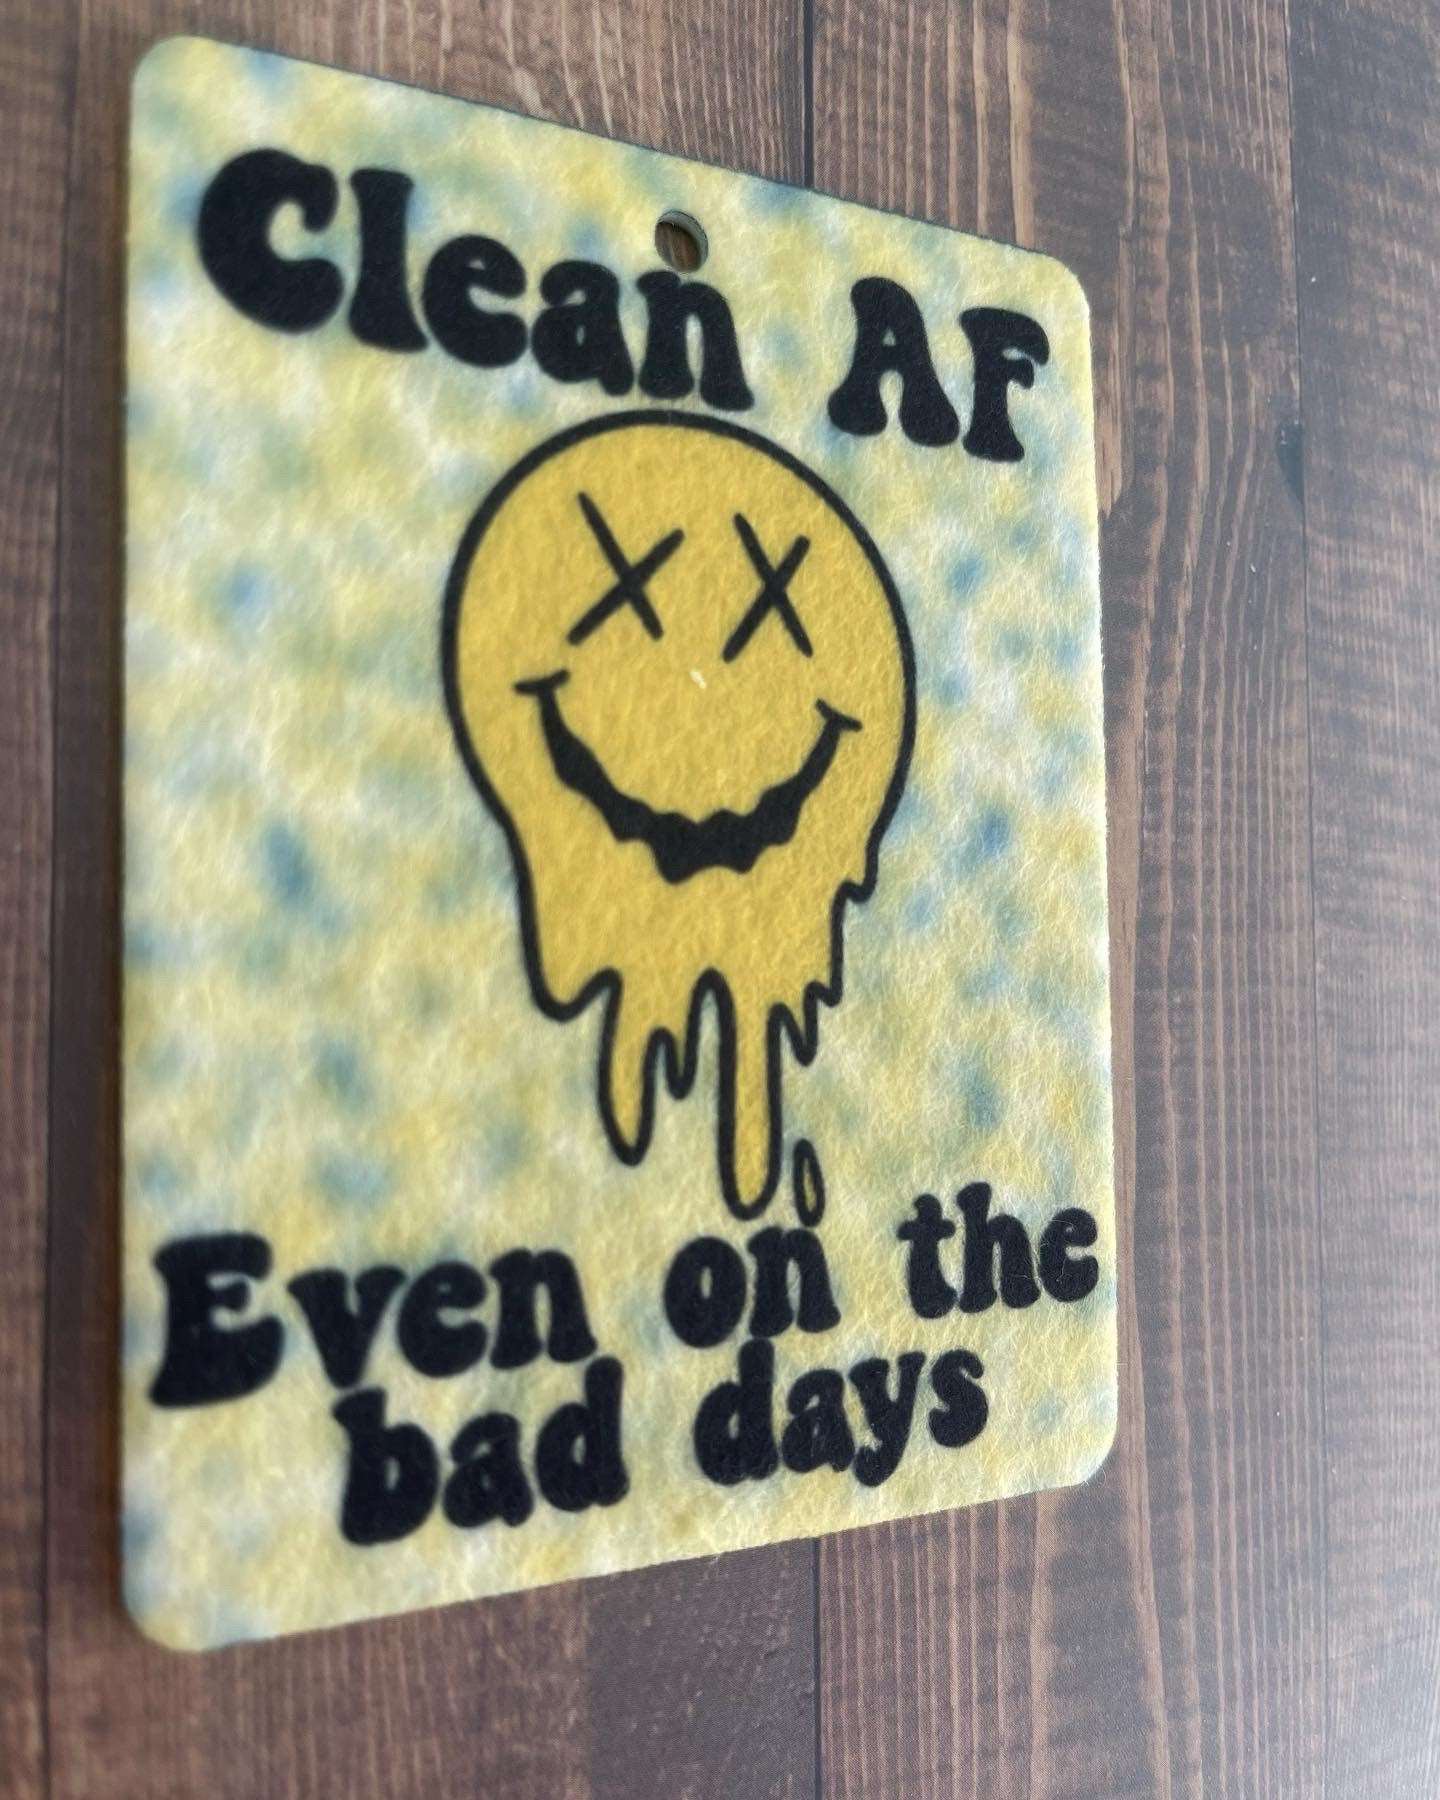 Groovy addiction recovery air freshener, Clean AF even on the bad days